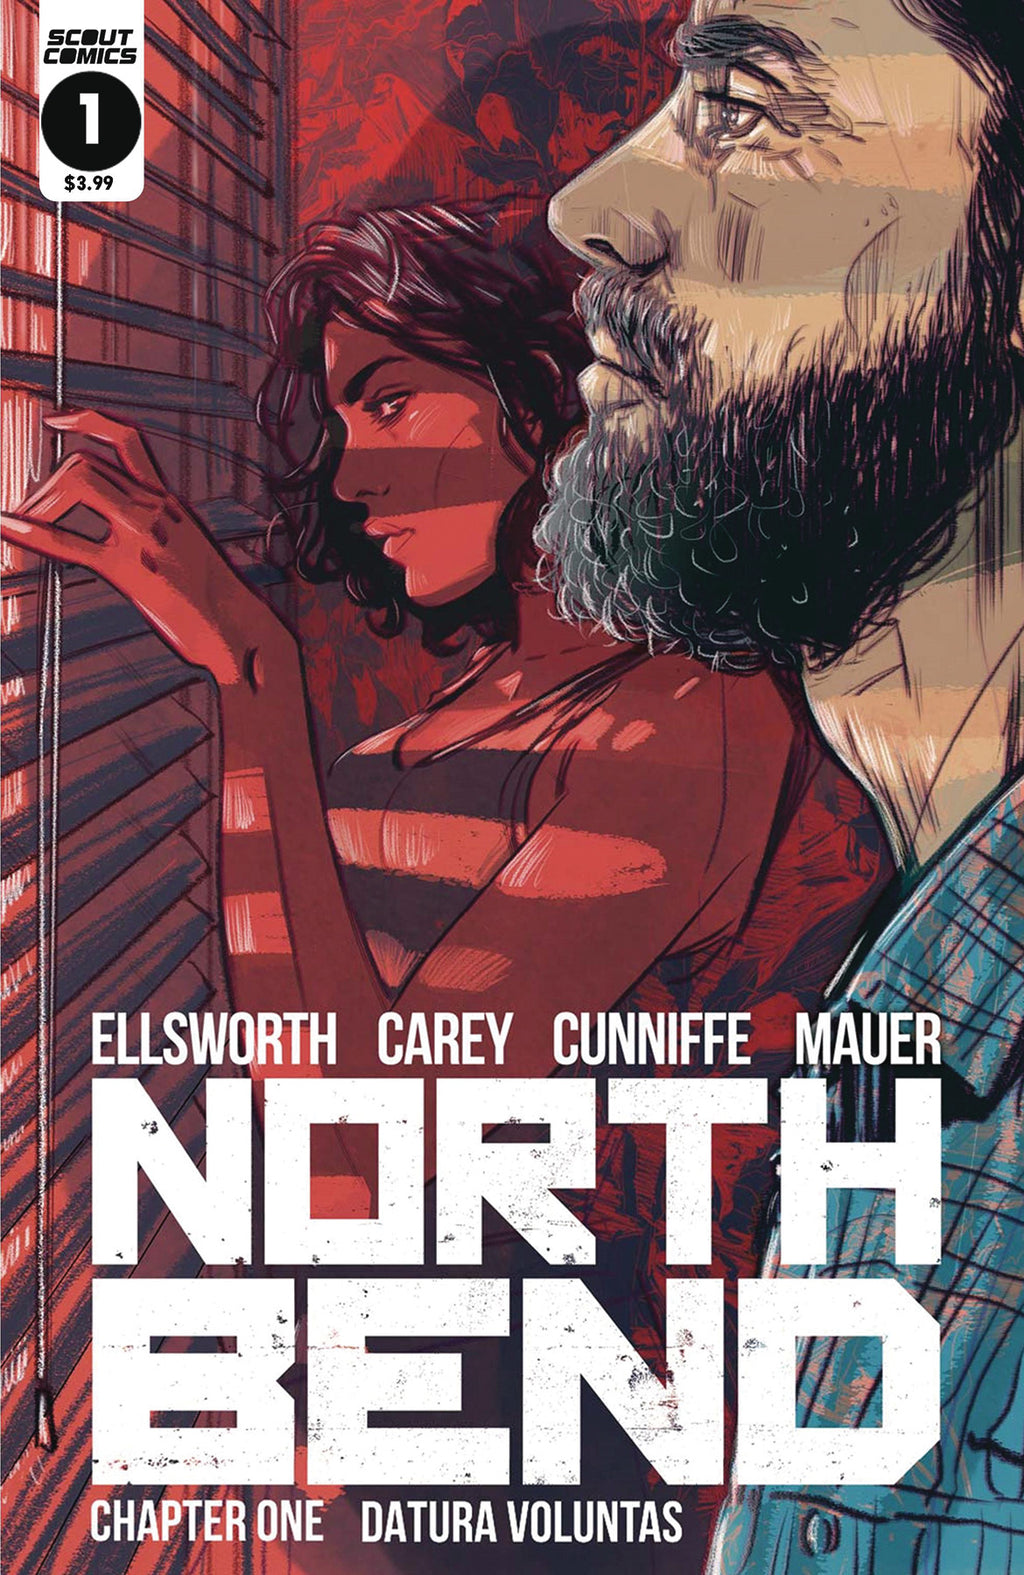 North Bend #1 - Cover B